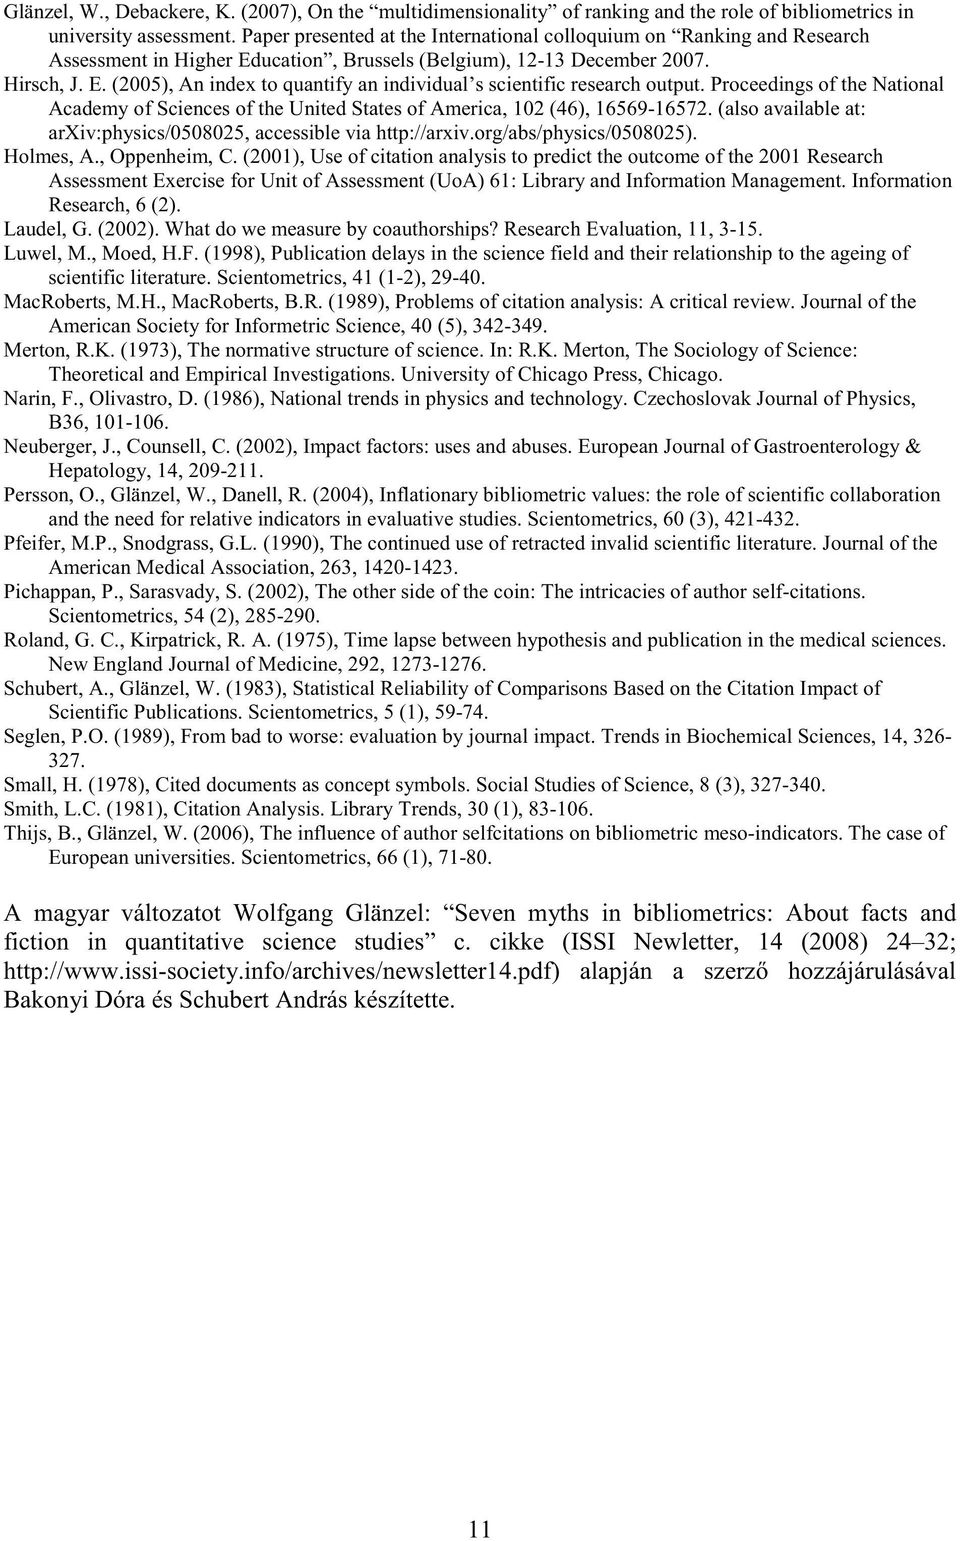 Proceedings of the National Academy of Sciences of the United States of America, 102 (46), 16569-16572. (also available at: arxiv:physics/0508025, accessible via http://arxiv.org/abs/physics/0508025).